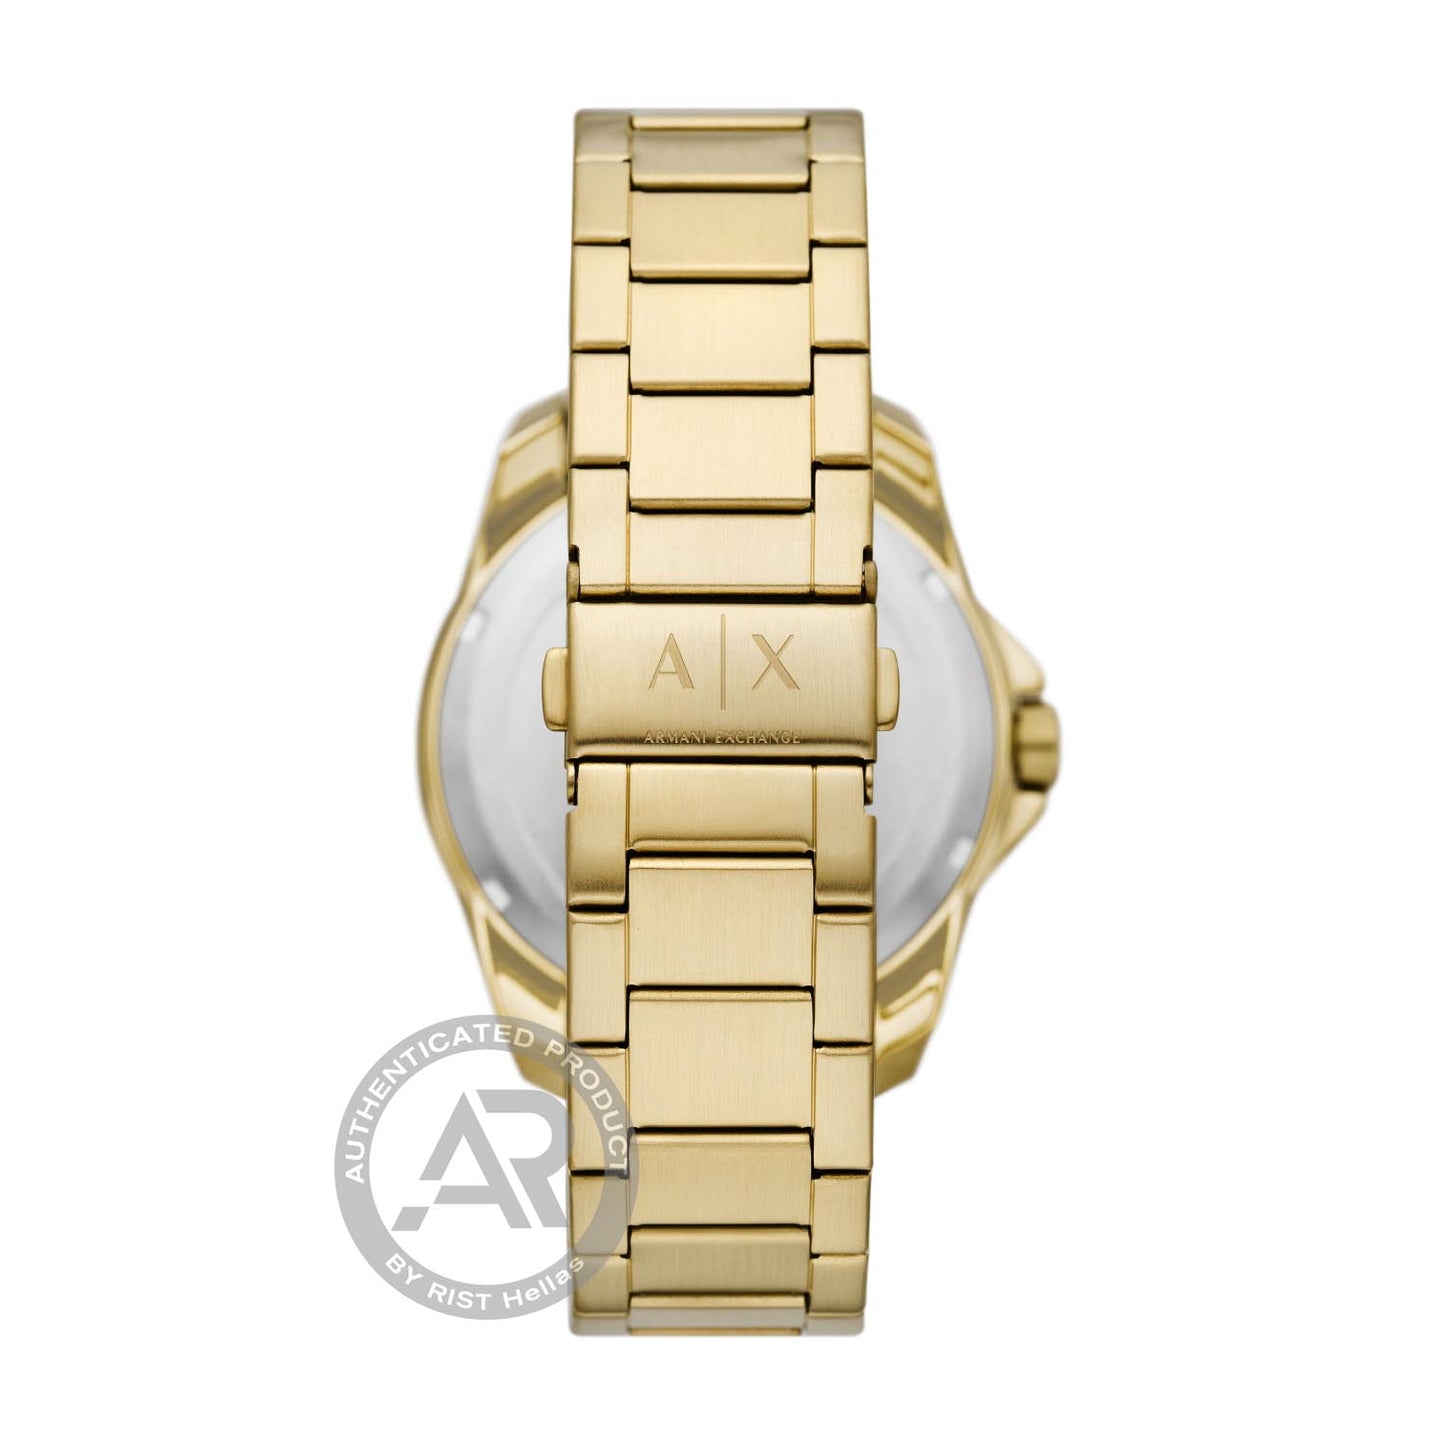 Armani Exchange AX1951 Spencer Gold Stainless Steel Bracelet